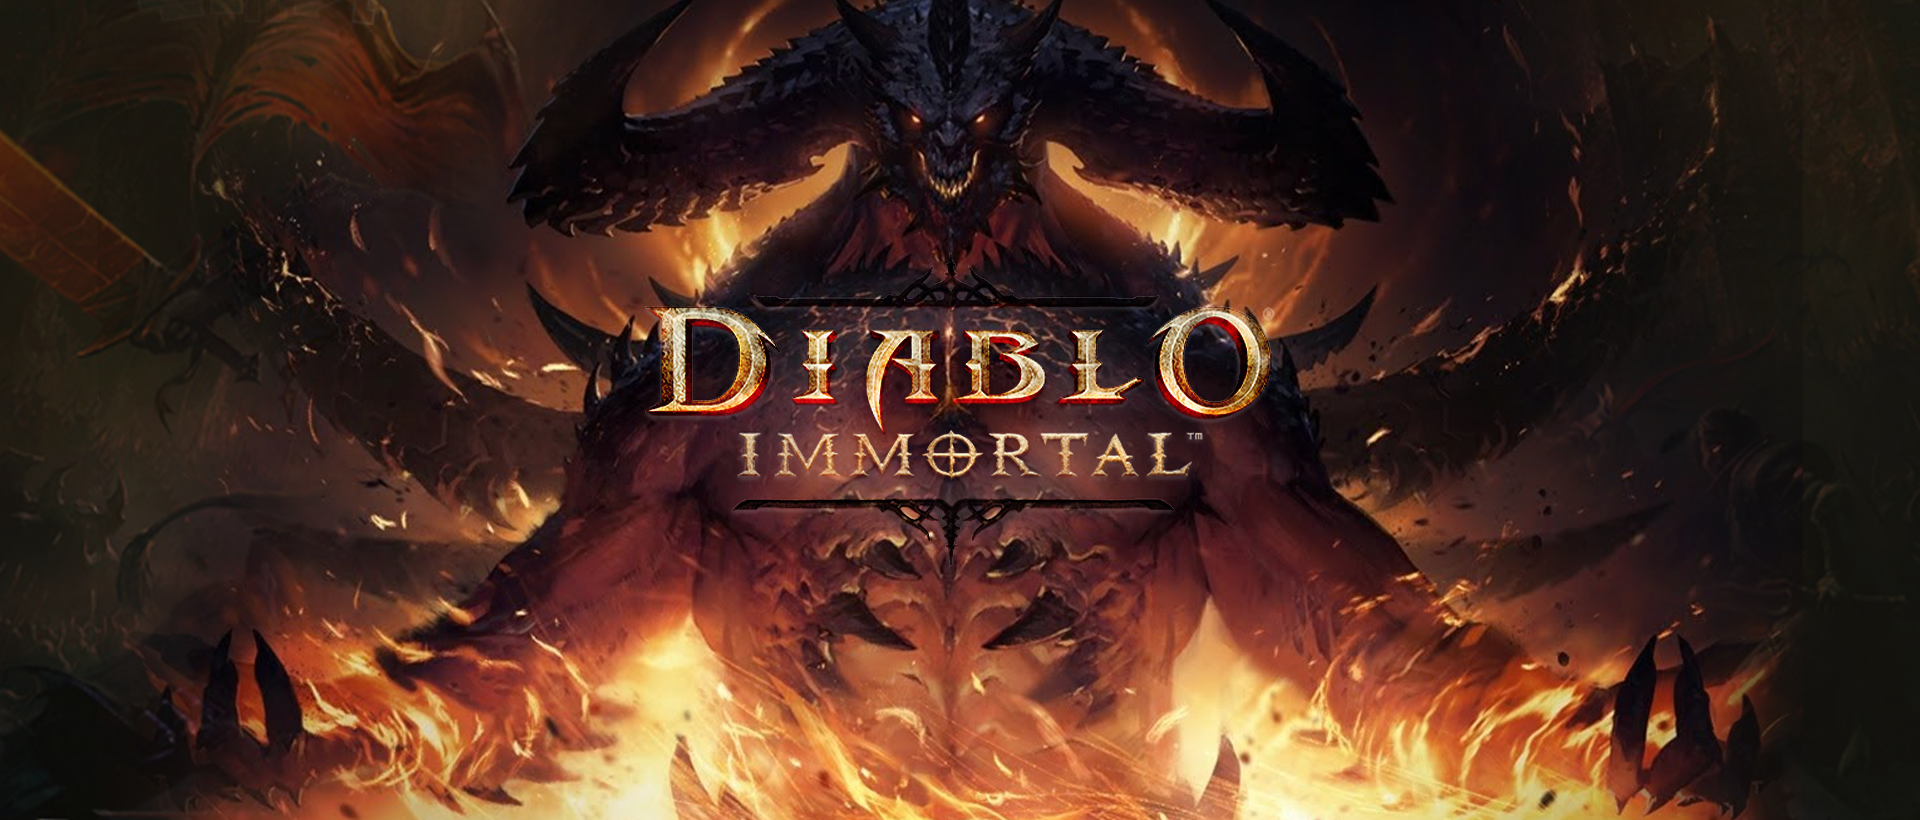 Download Diablo Immortal on PC with NoxPlayer-Appcenter